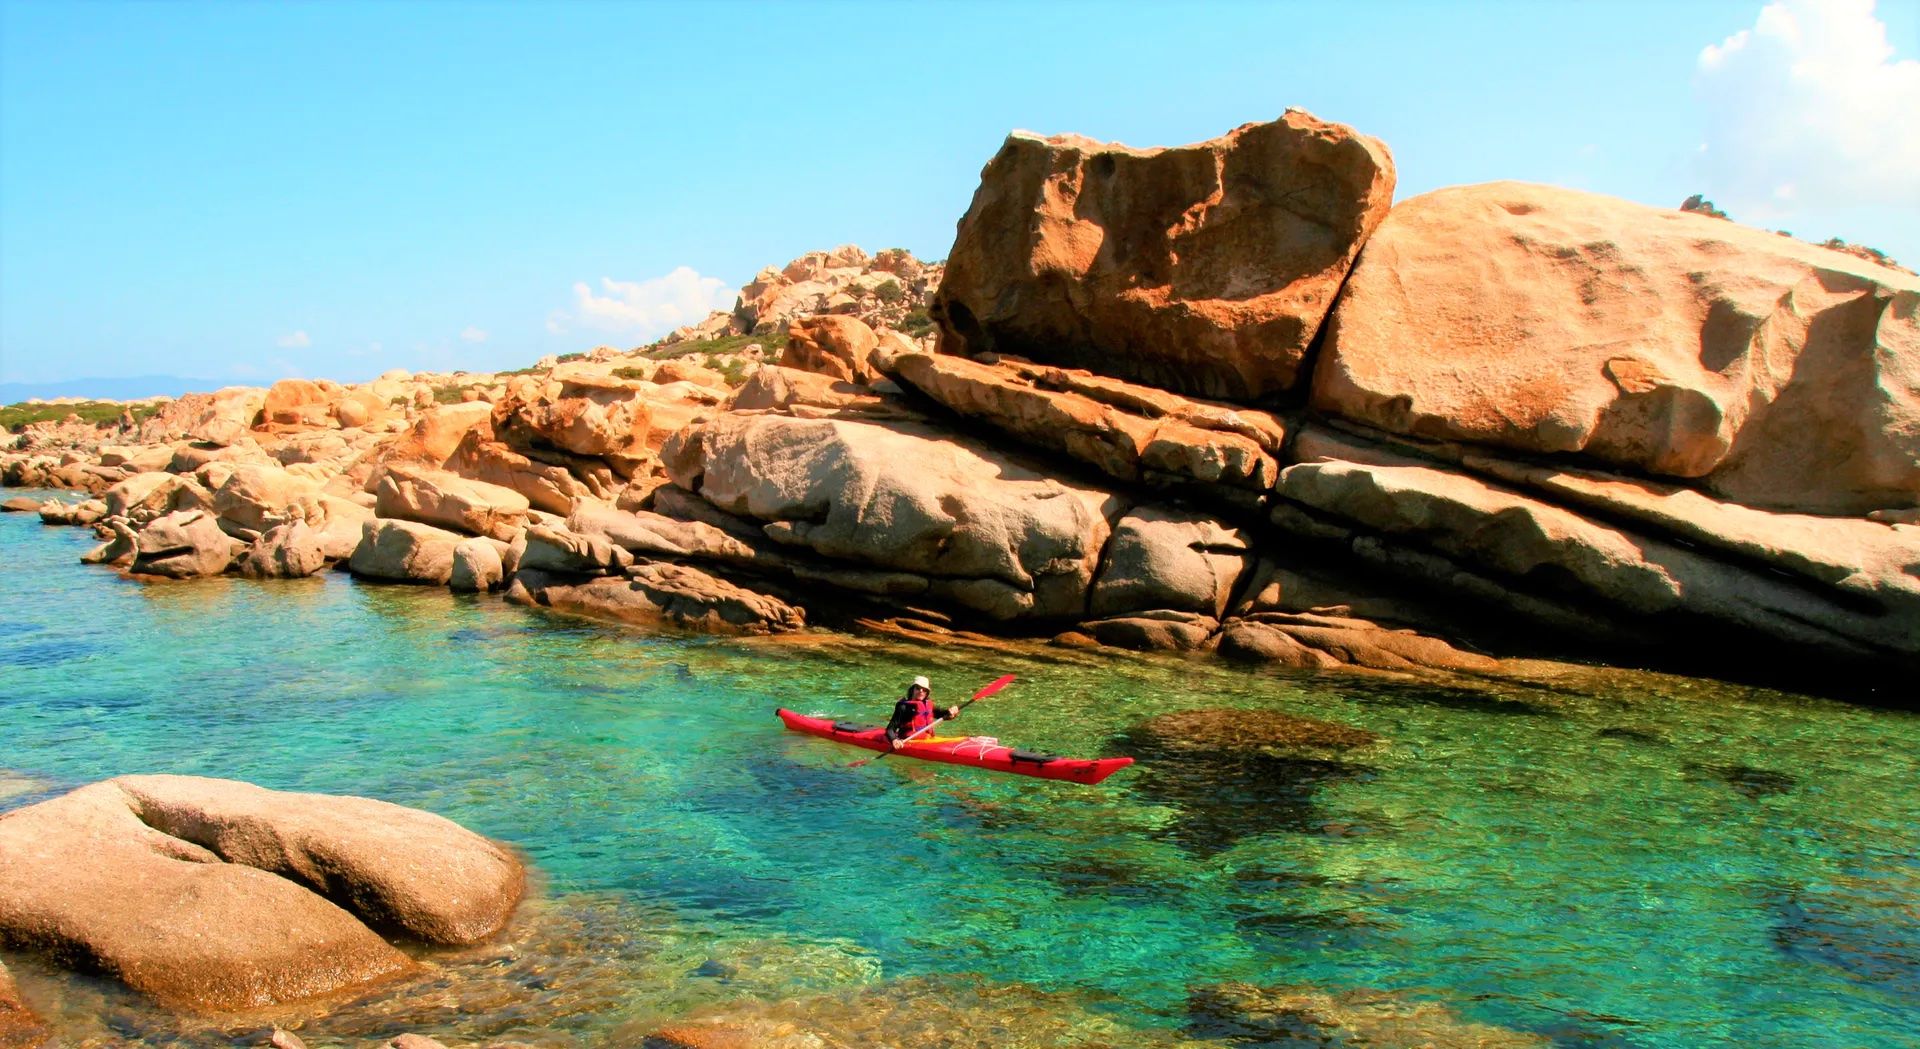 The calm Corsican seas are perfect for beginners in sea kayaking.